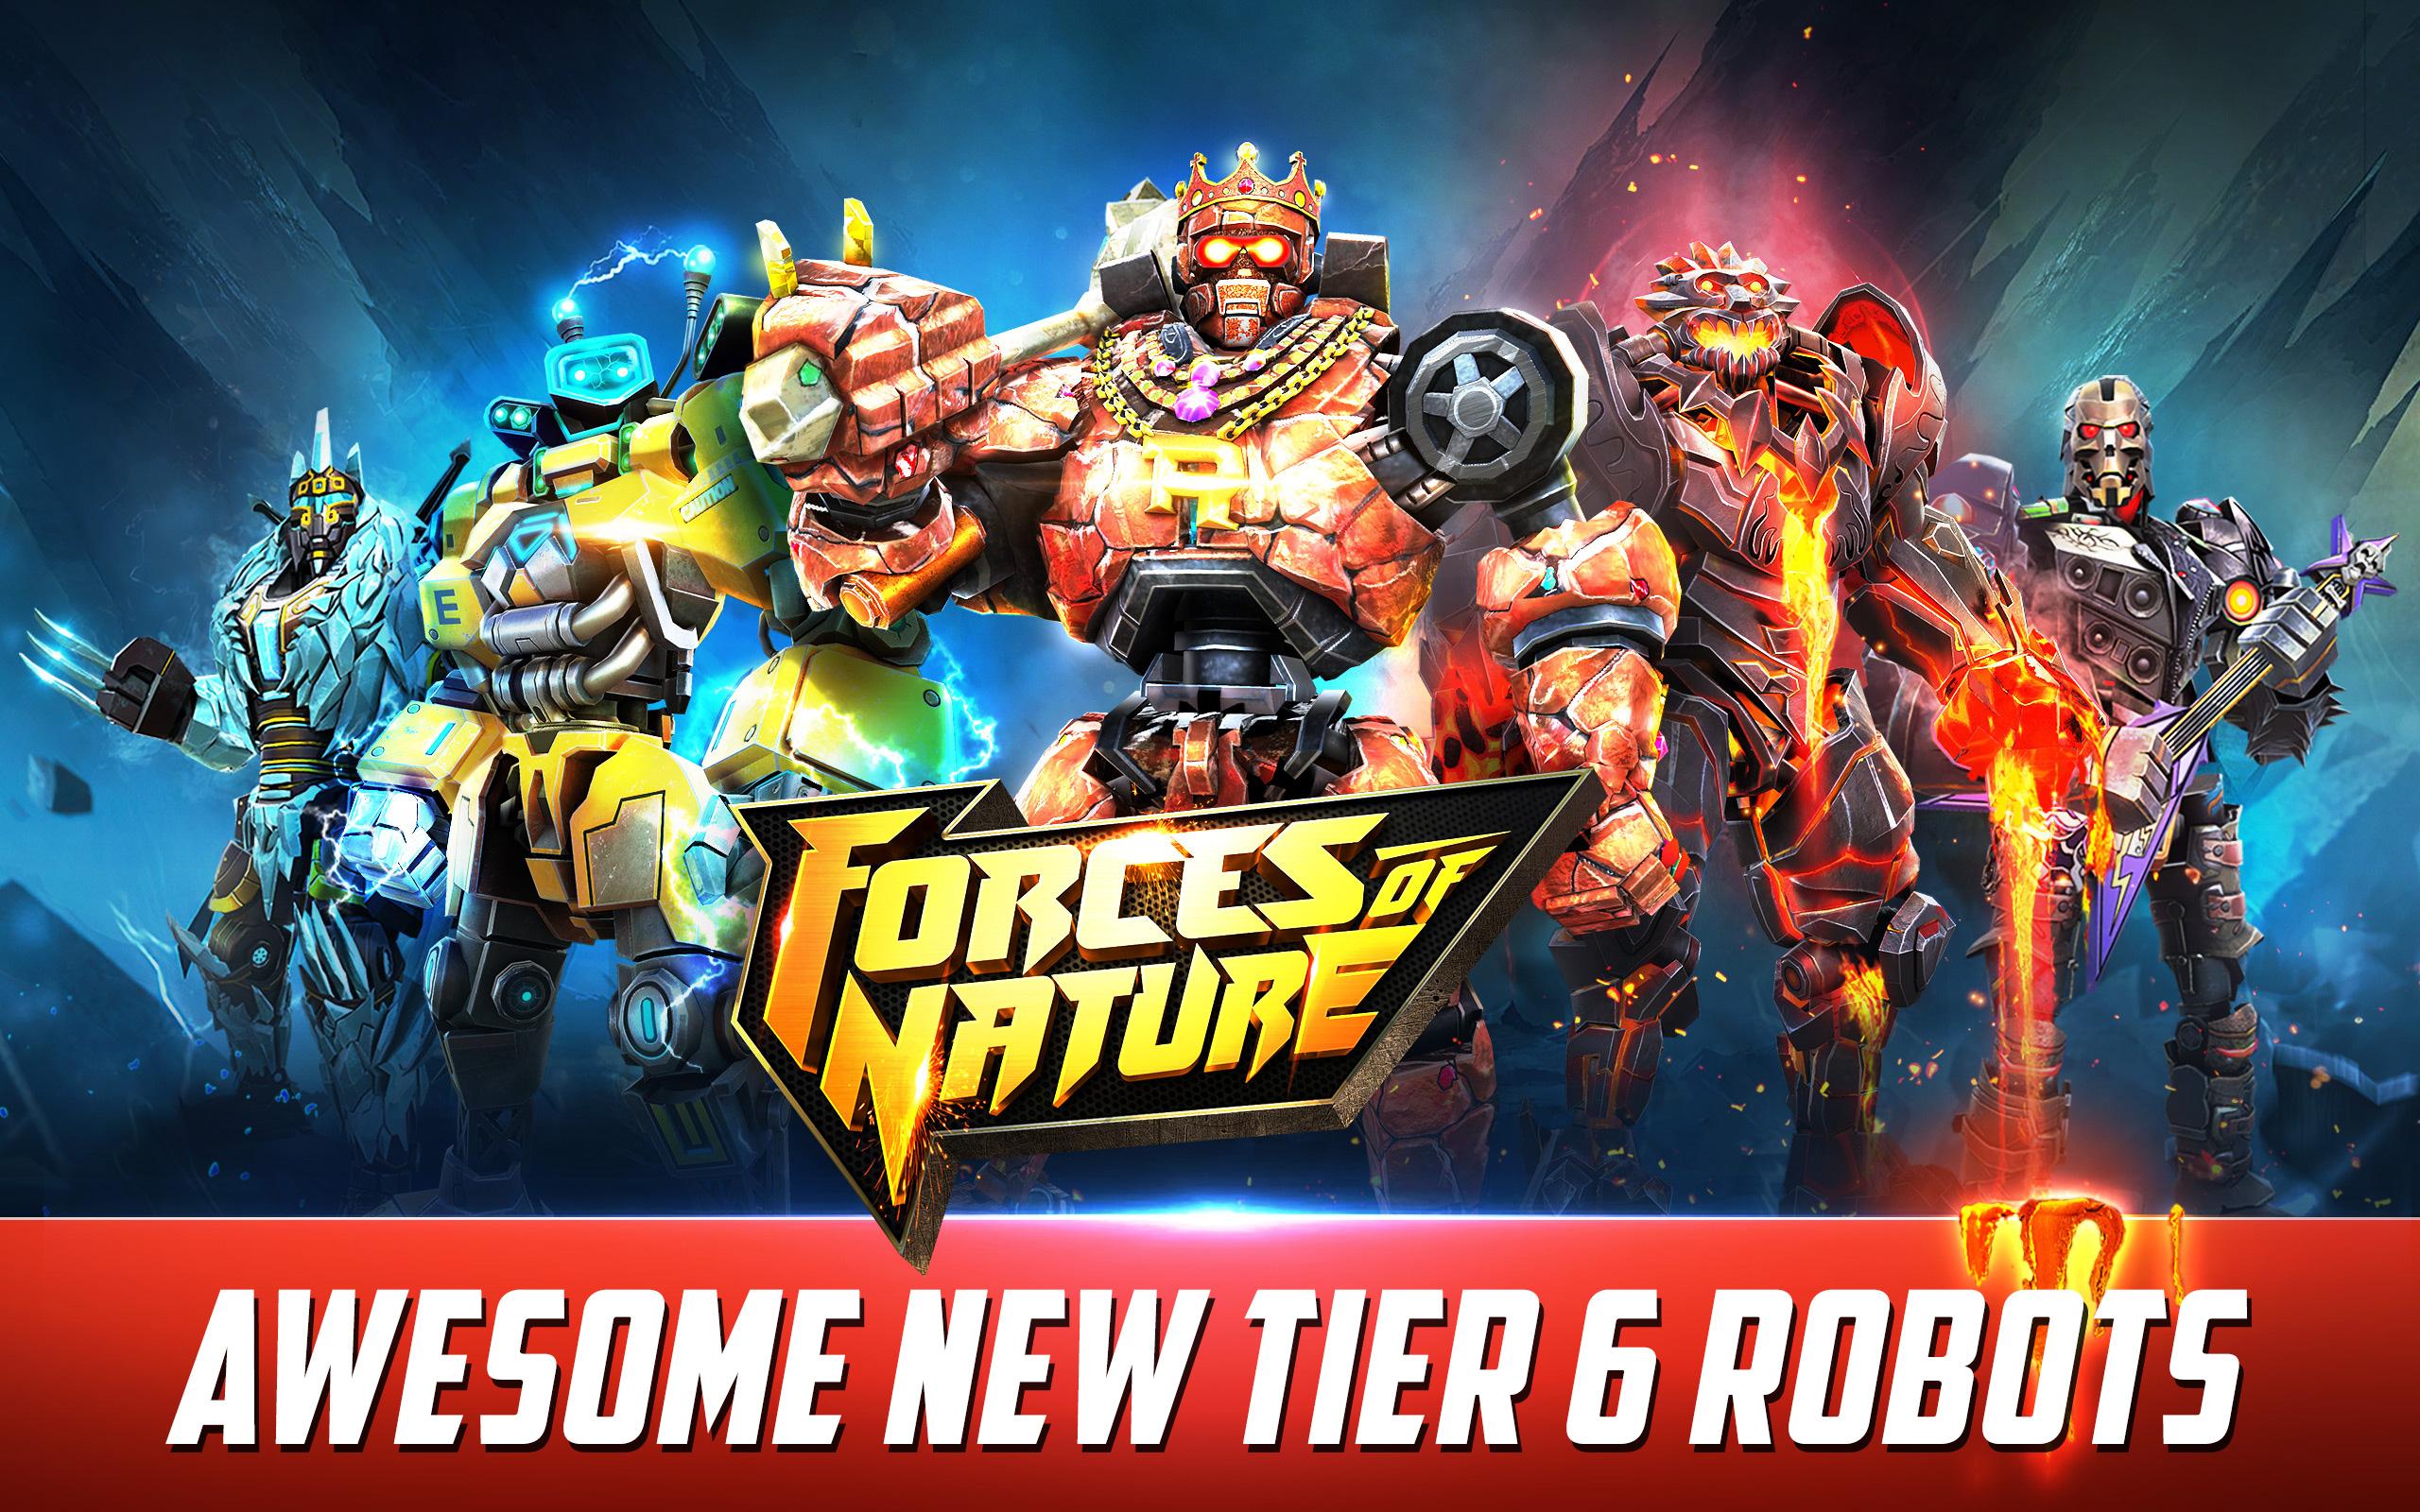 Real Steel World Robot Boxing for Android - APK Download